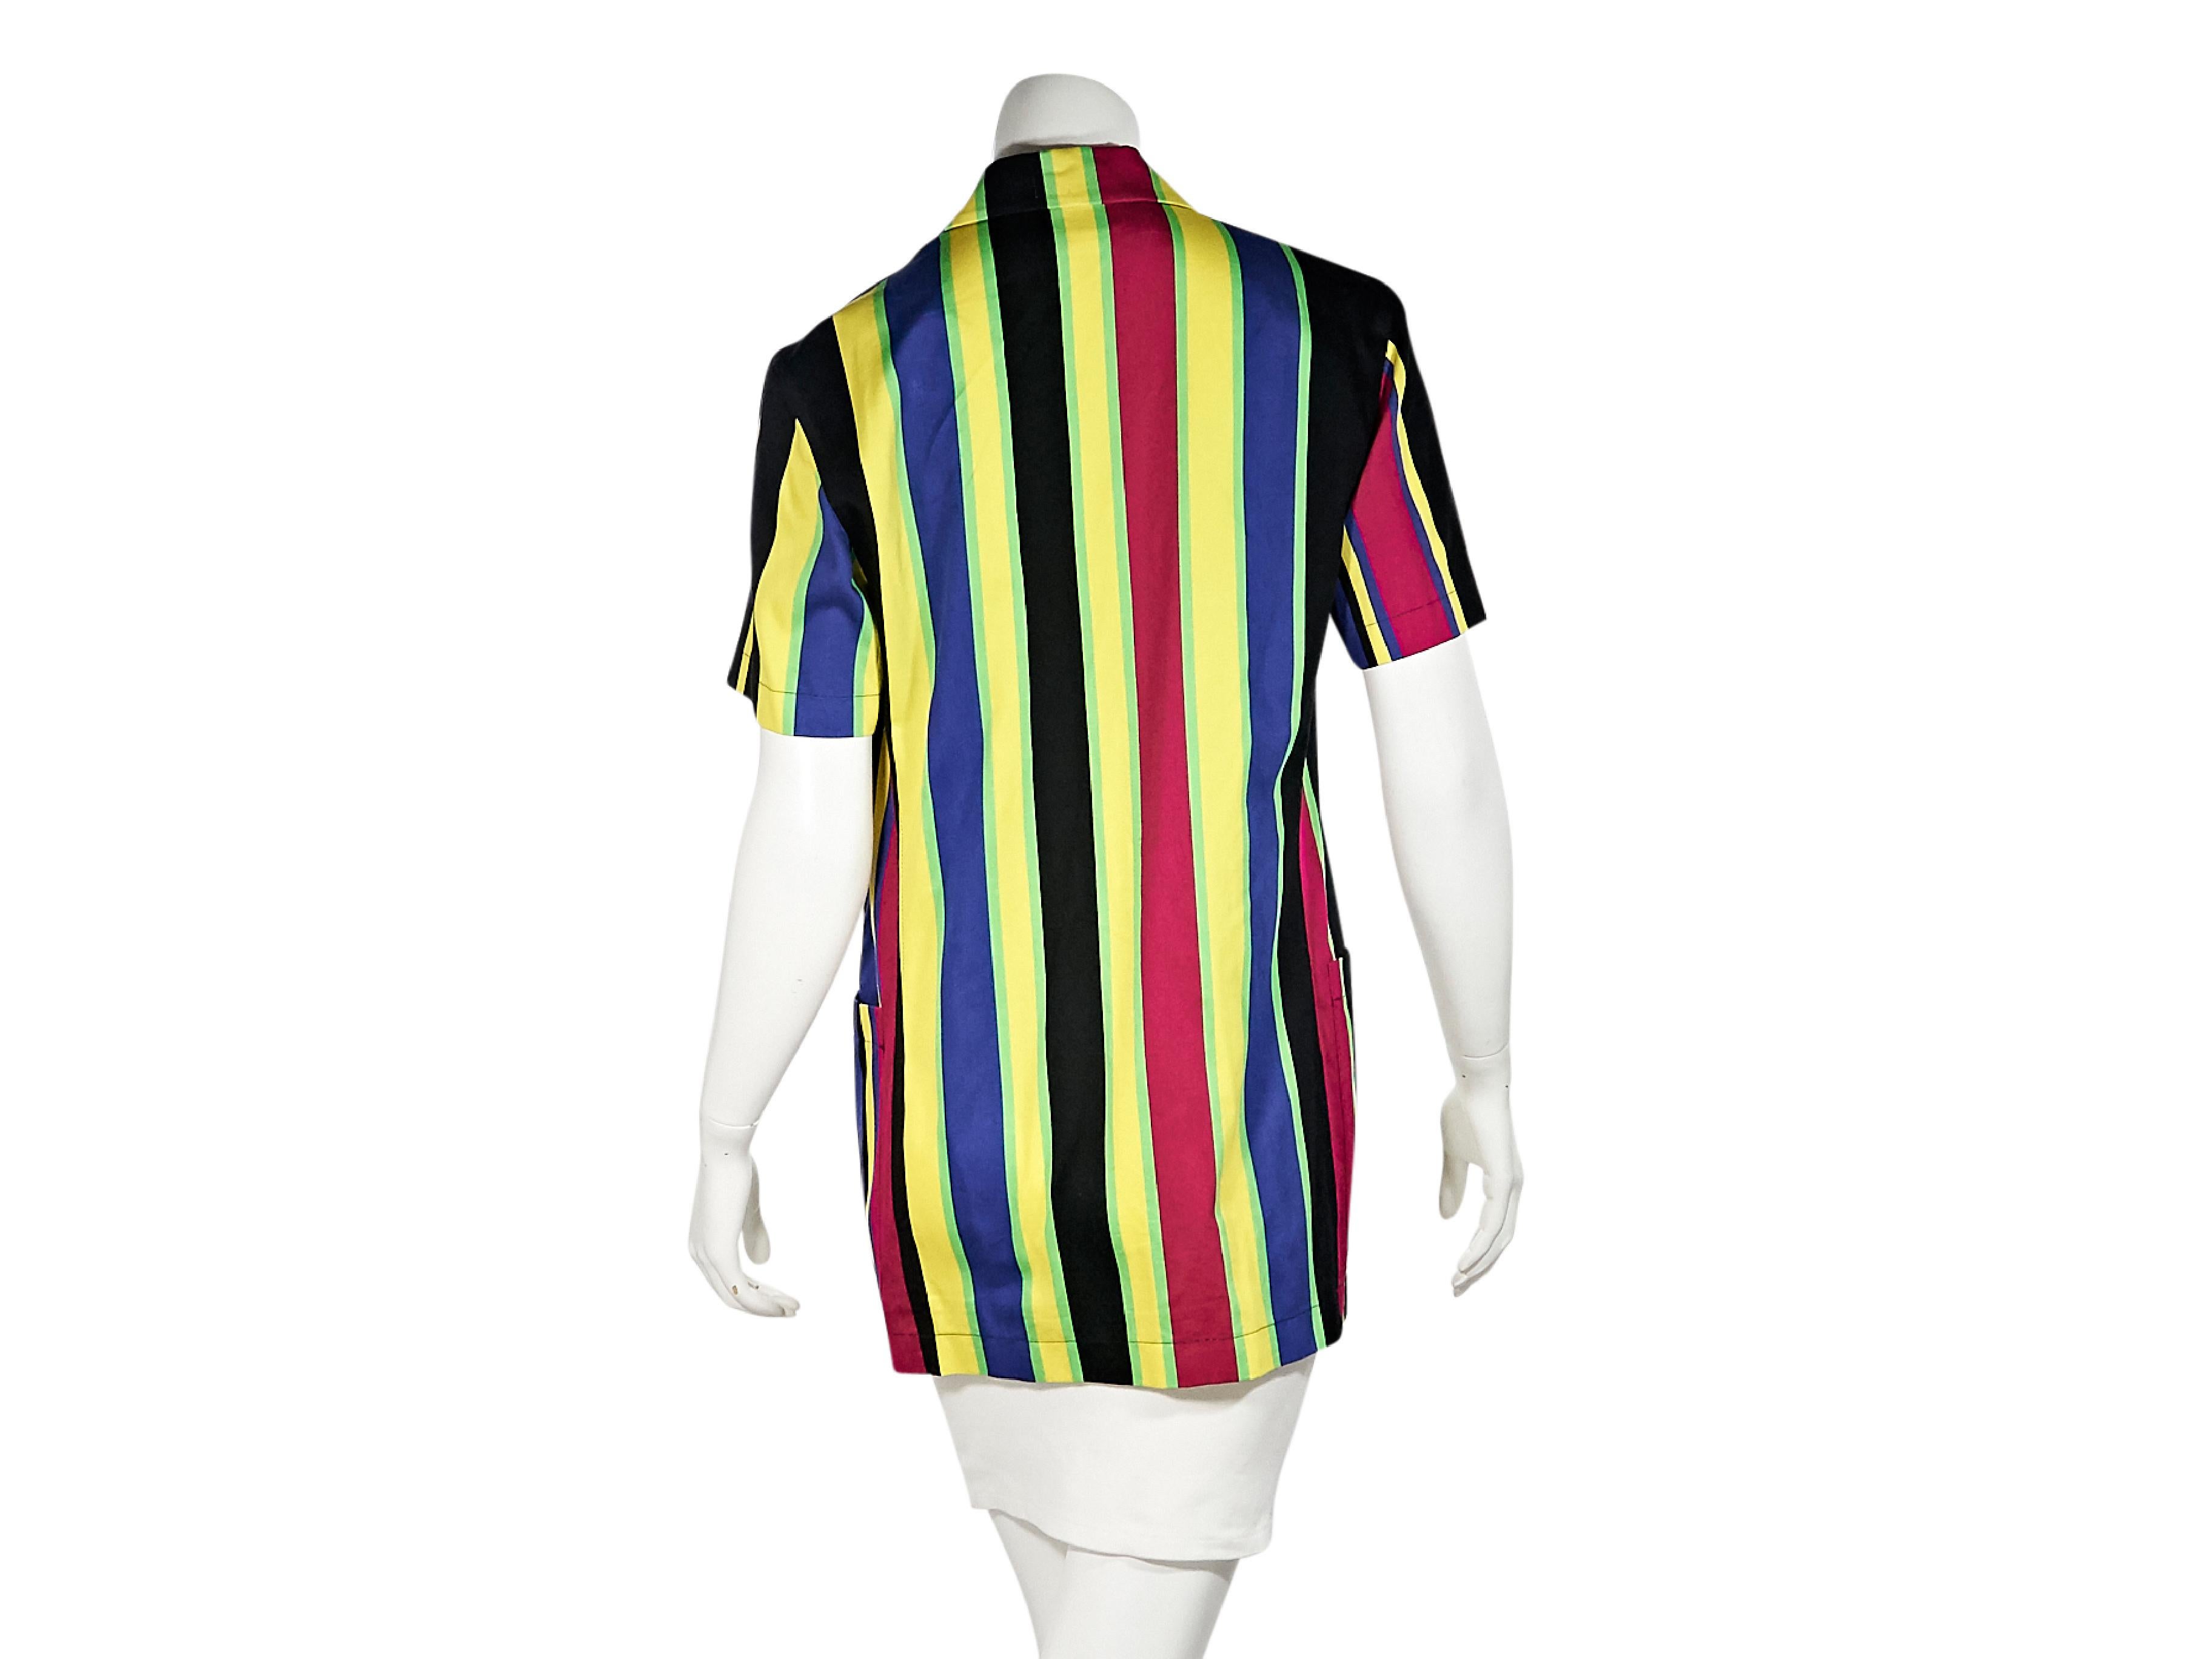 Product details:  Vintage multicolor striped cotton jacket by Genny.  Notched lapel.  Short sleeves.  Single-button closure.  Waist patch pockets.  32.5